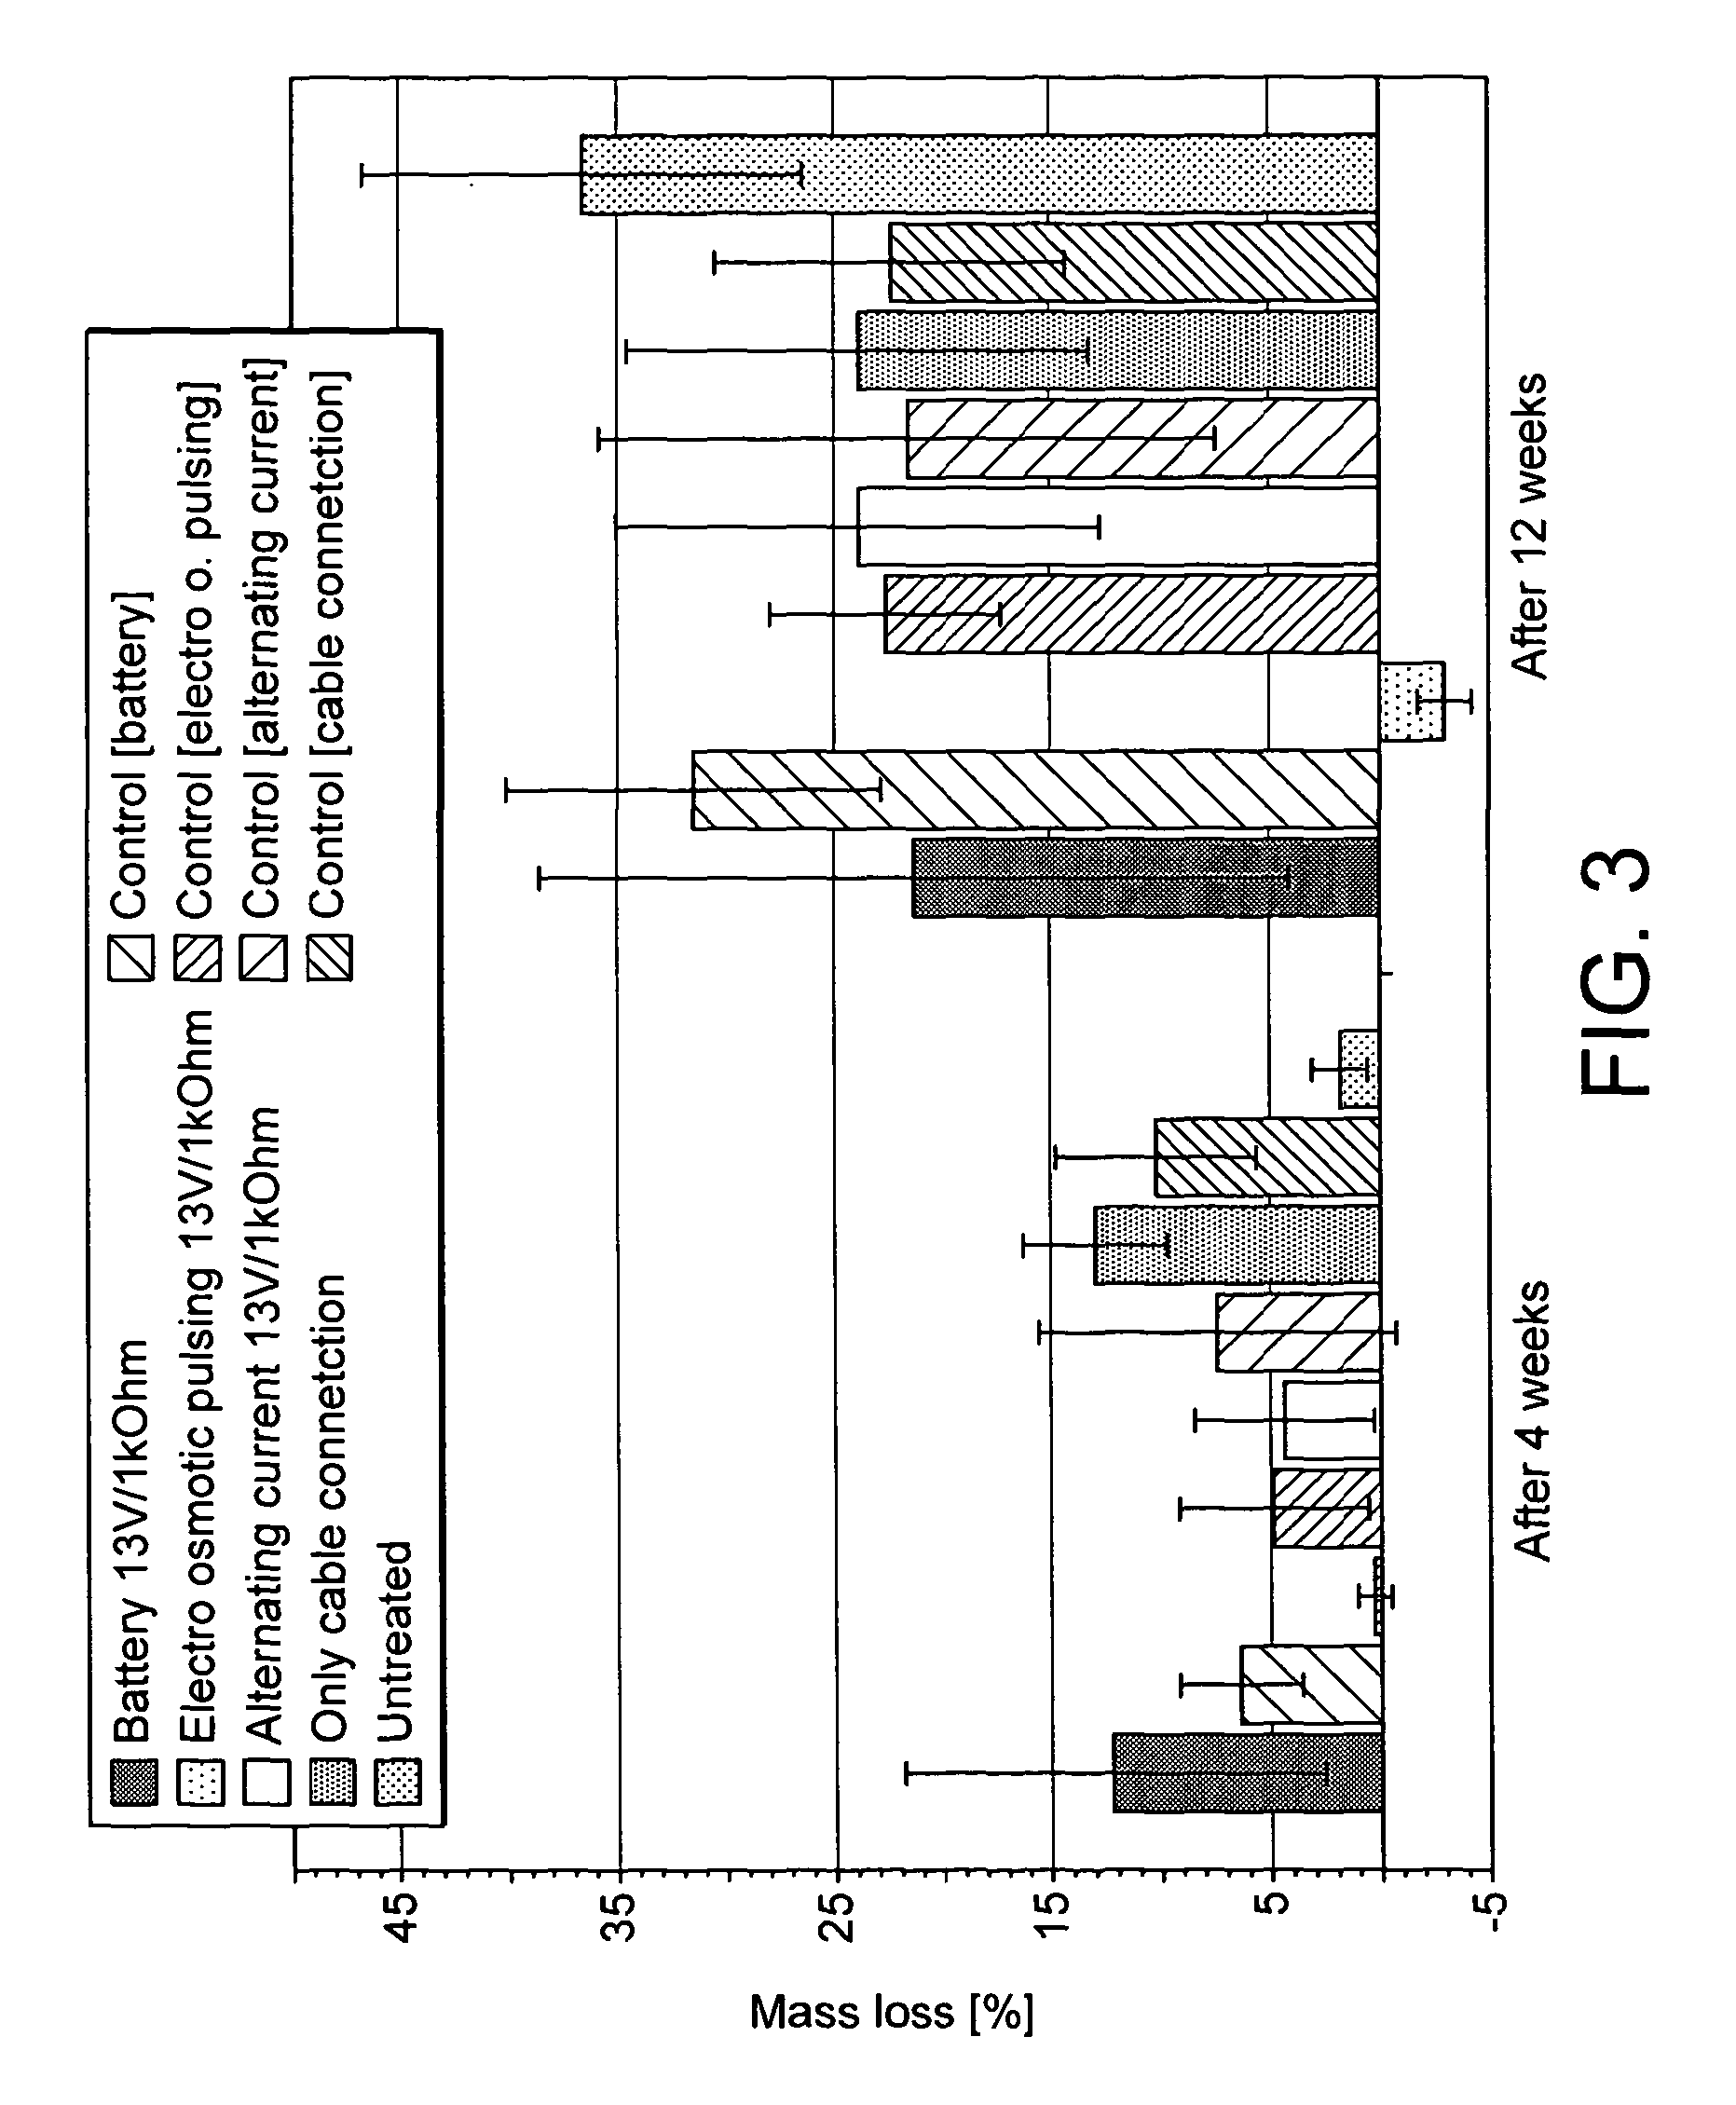 Method of treatment of cellulosic objects